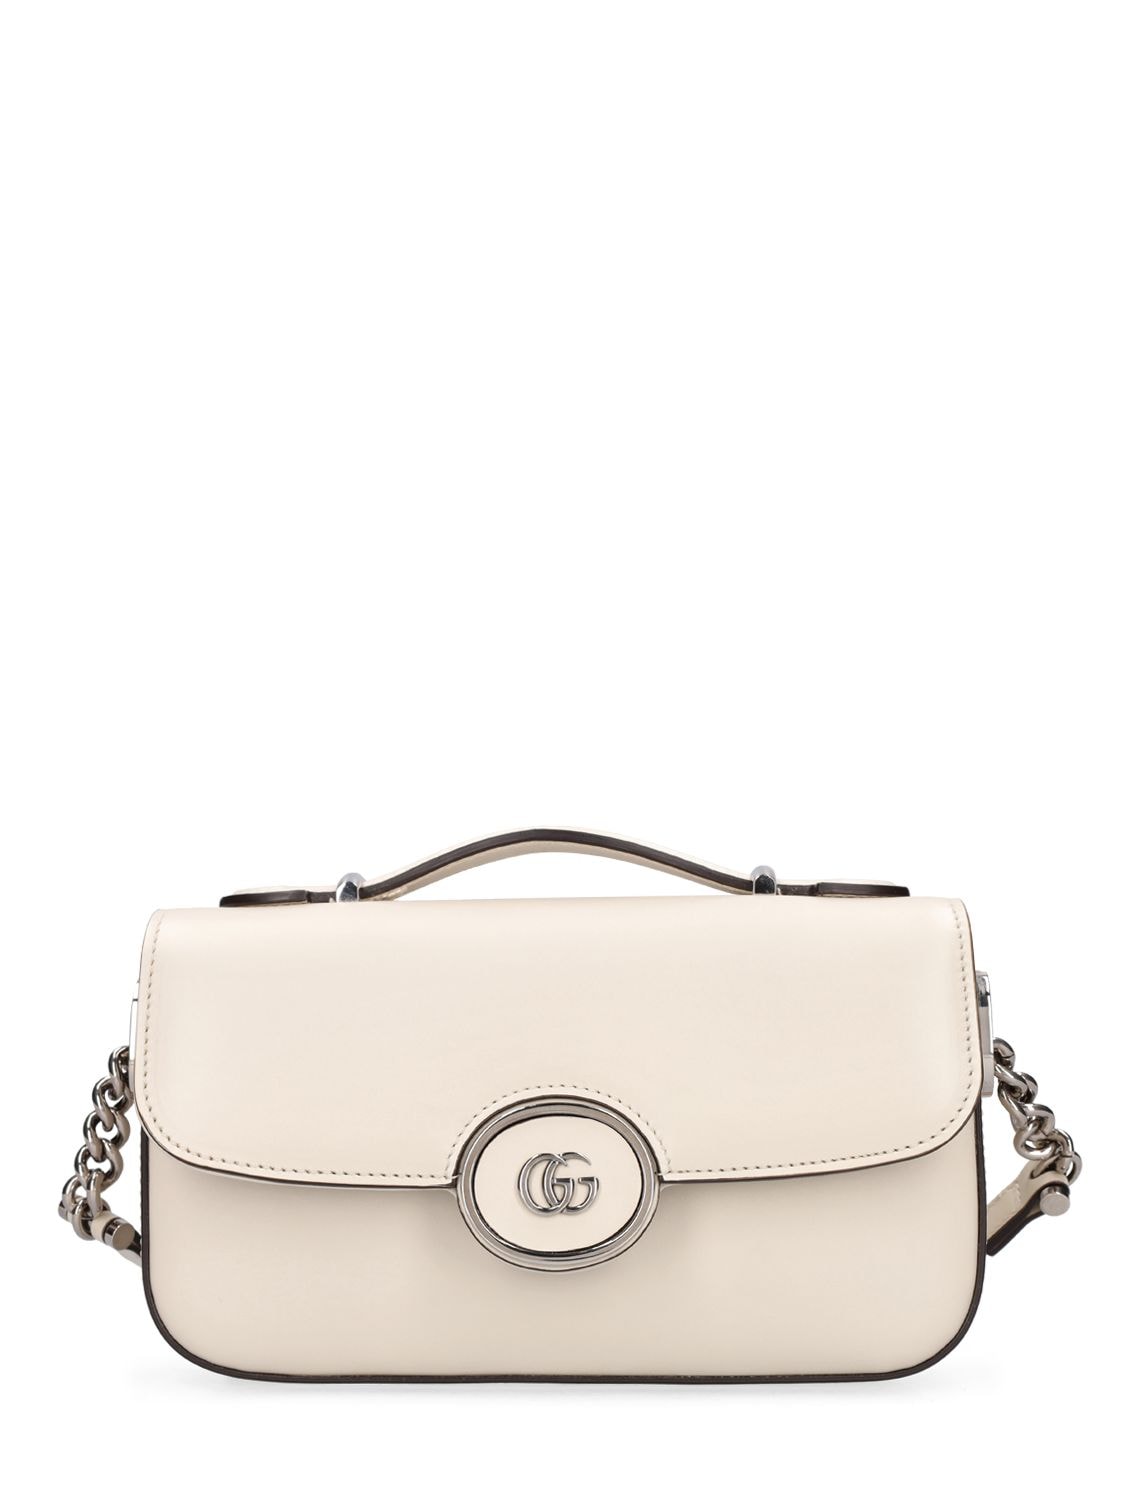 Gucci Petite Gg Leather Shoulder Bag In Mystic White